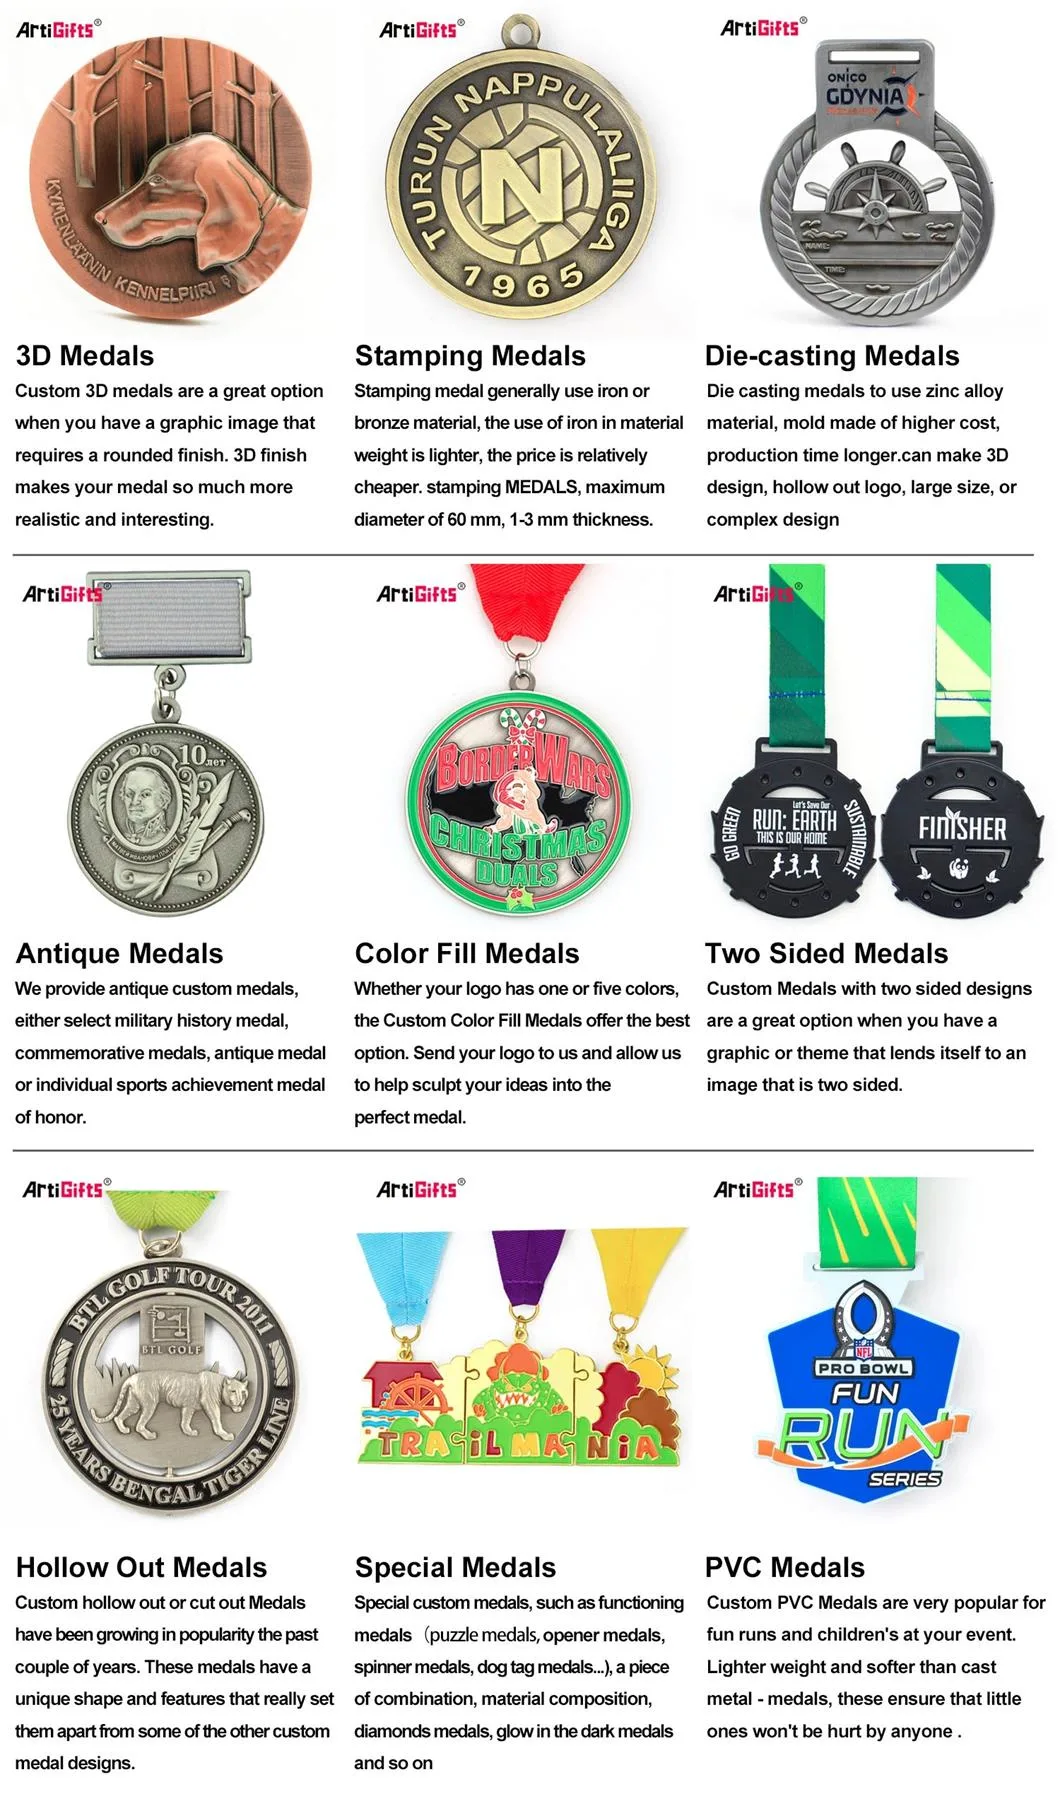 Maker Online Manufacture of Medals Make Your Own Stainless Steel Medals